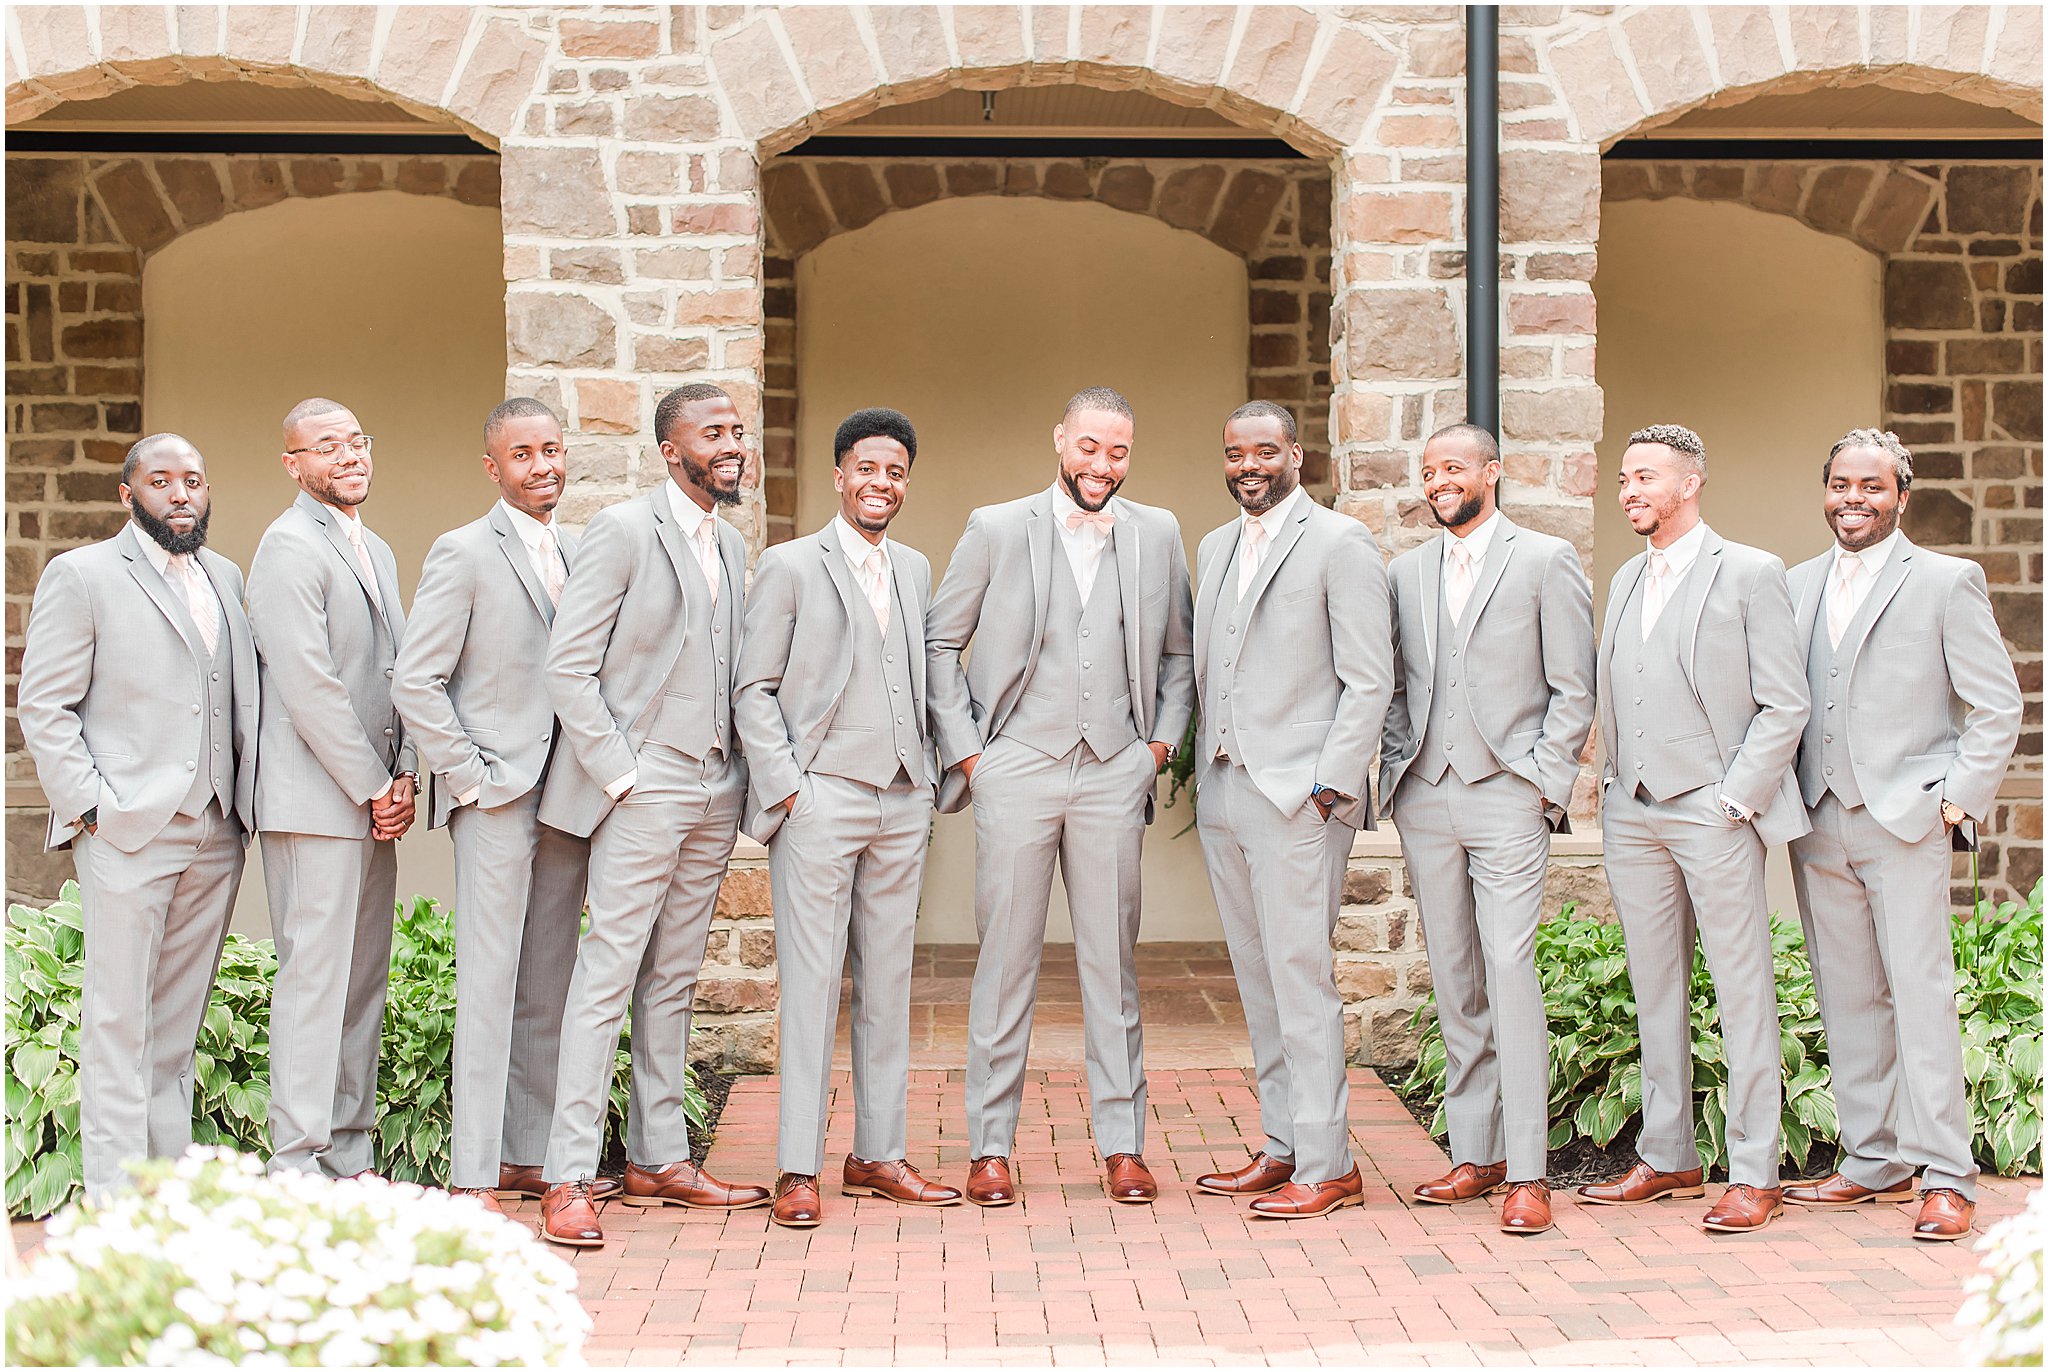 Groom and groomsmen portraits at the Pinnacle Golf Club in Grove City, OH | Courtney Carney Photography